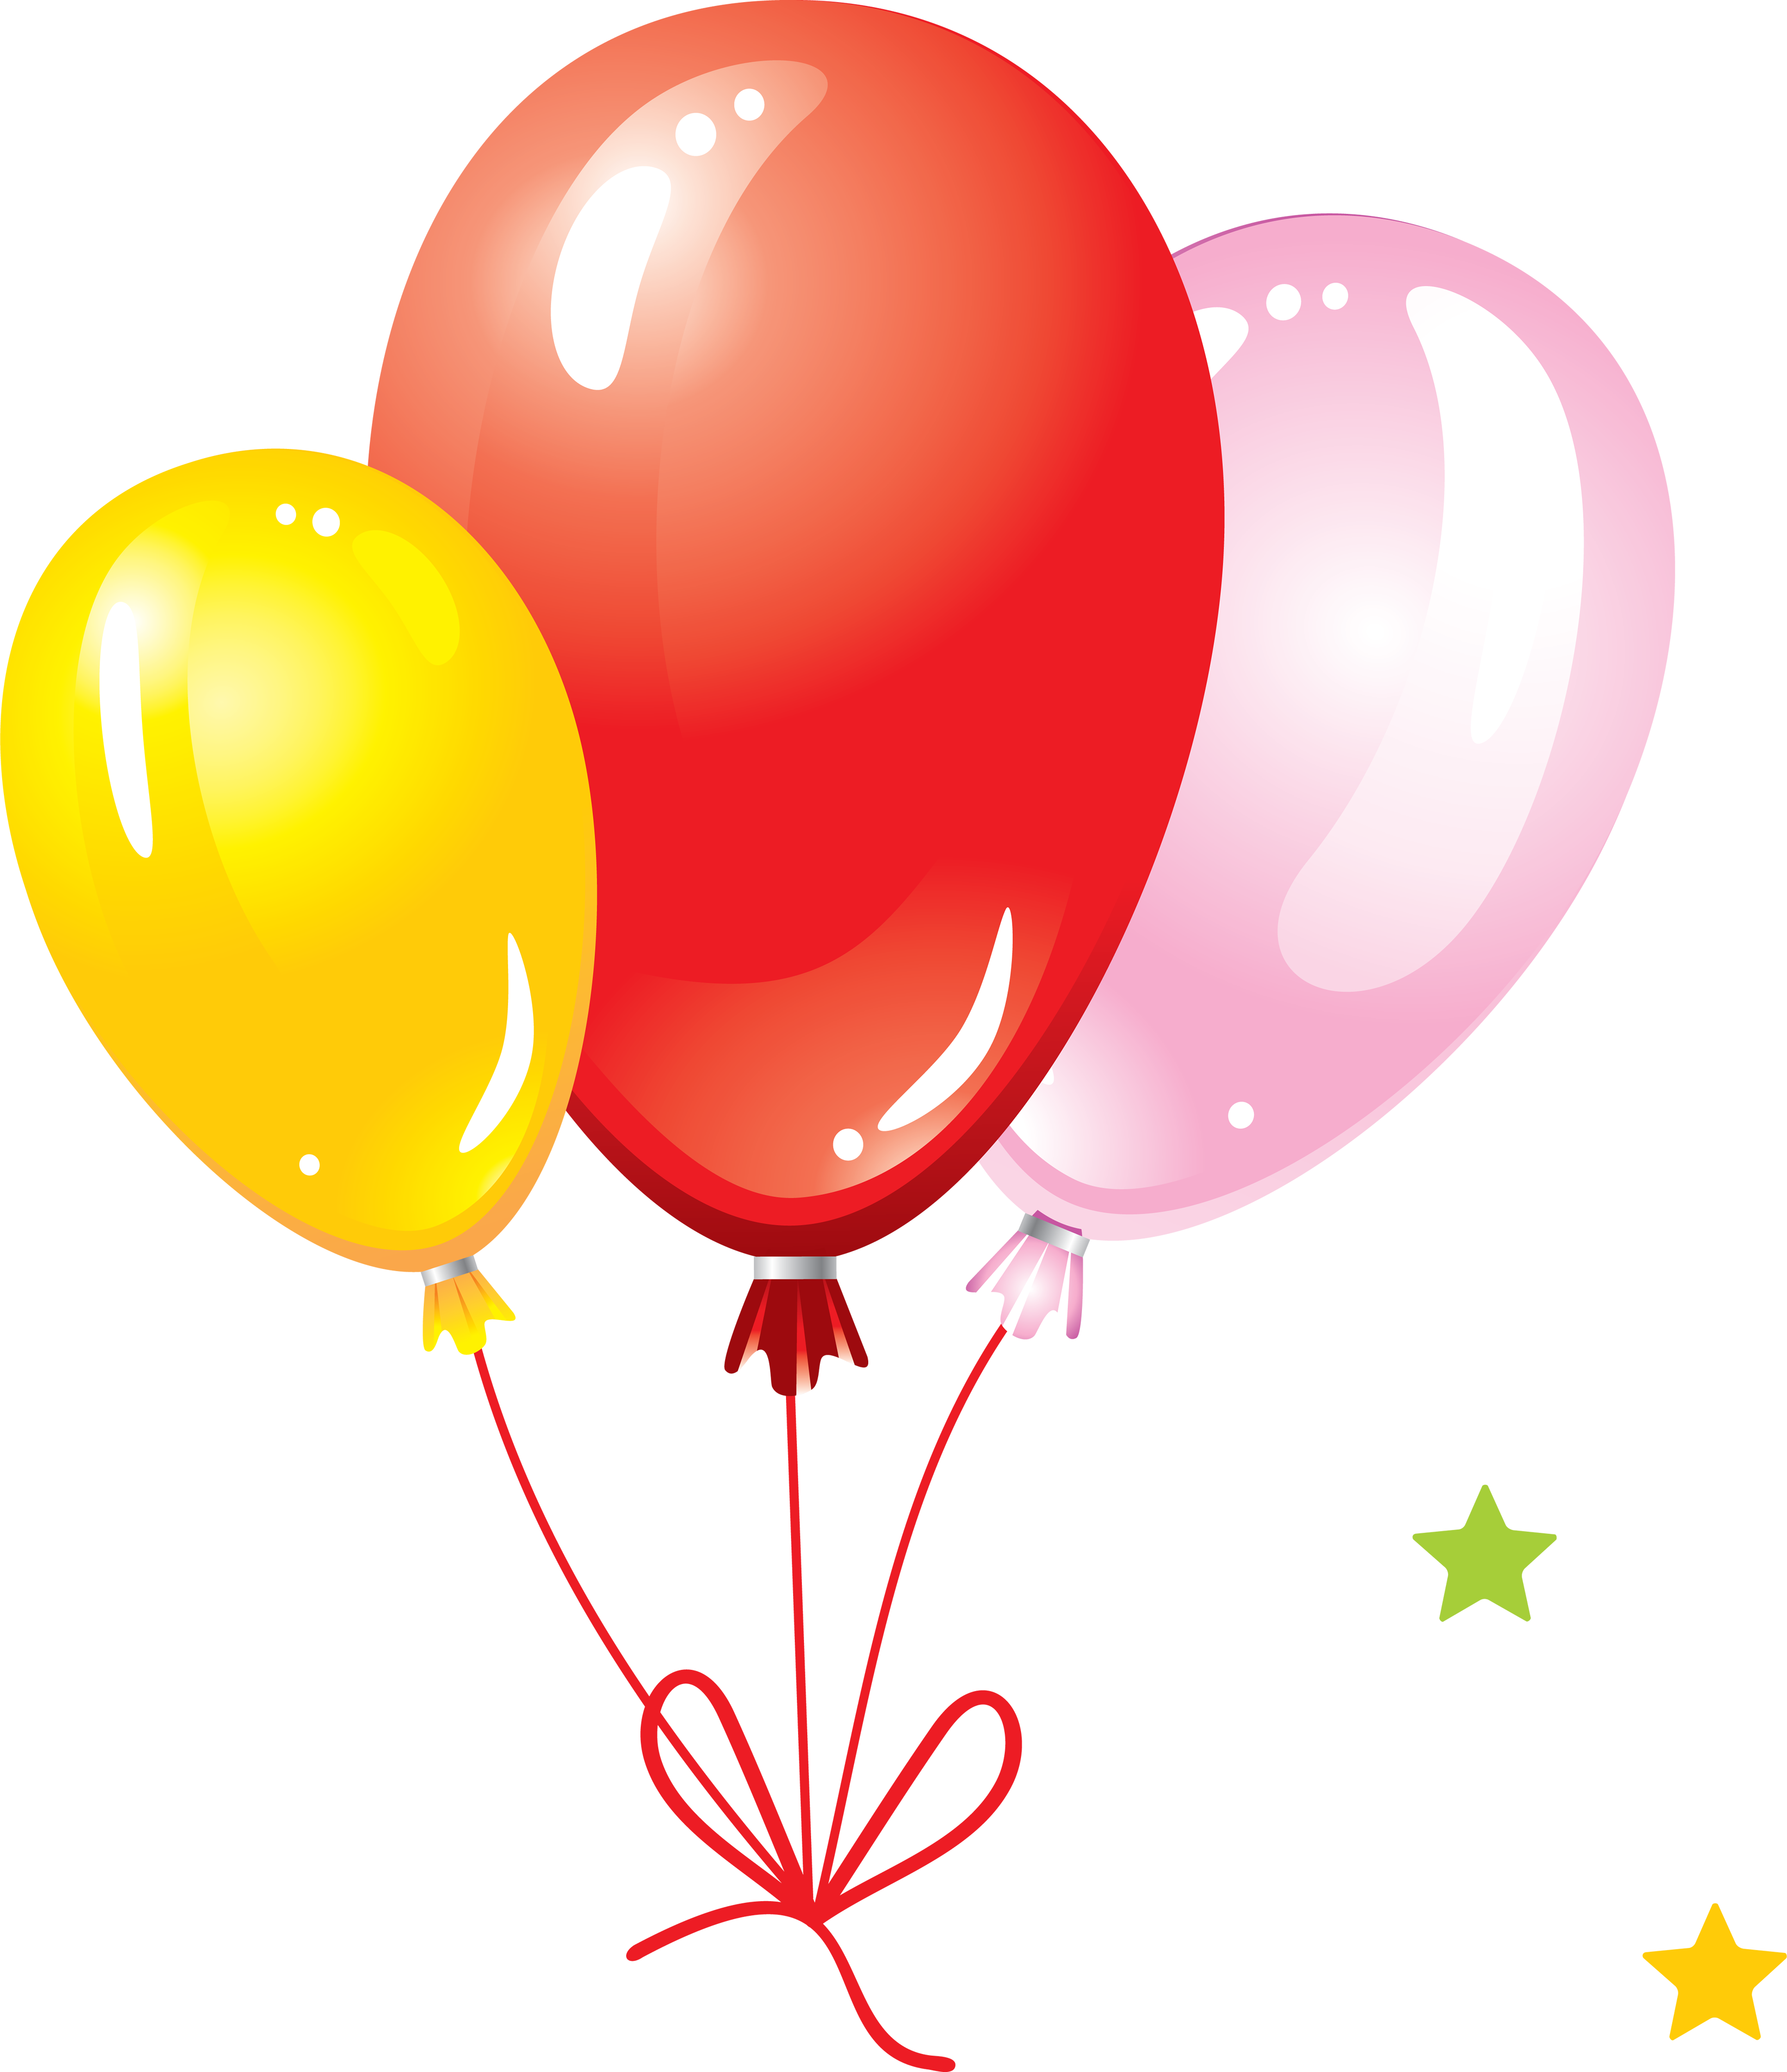 Balloon PNG image, free picture download with transparency